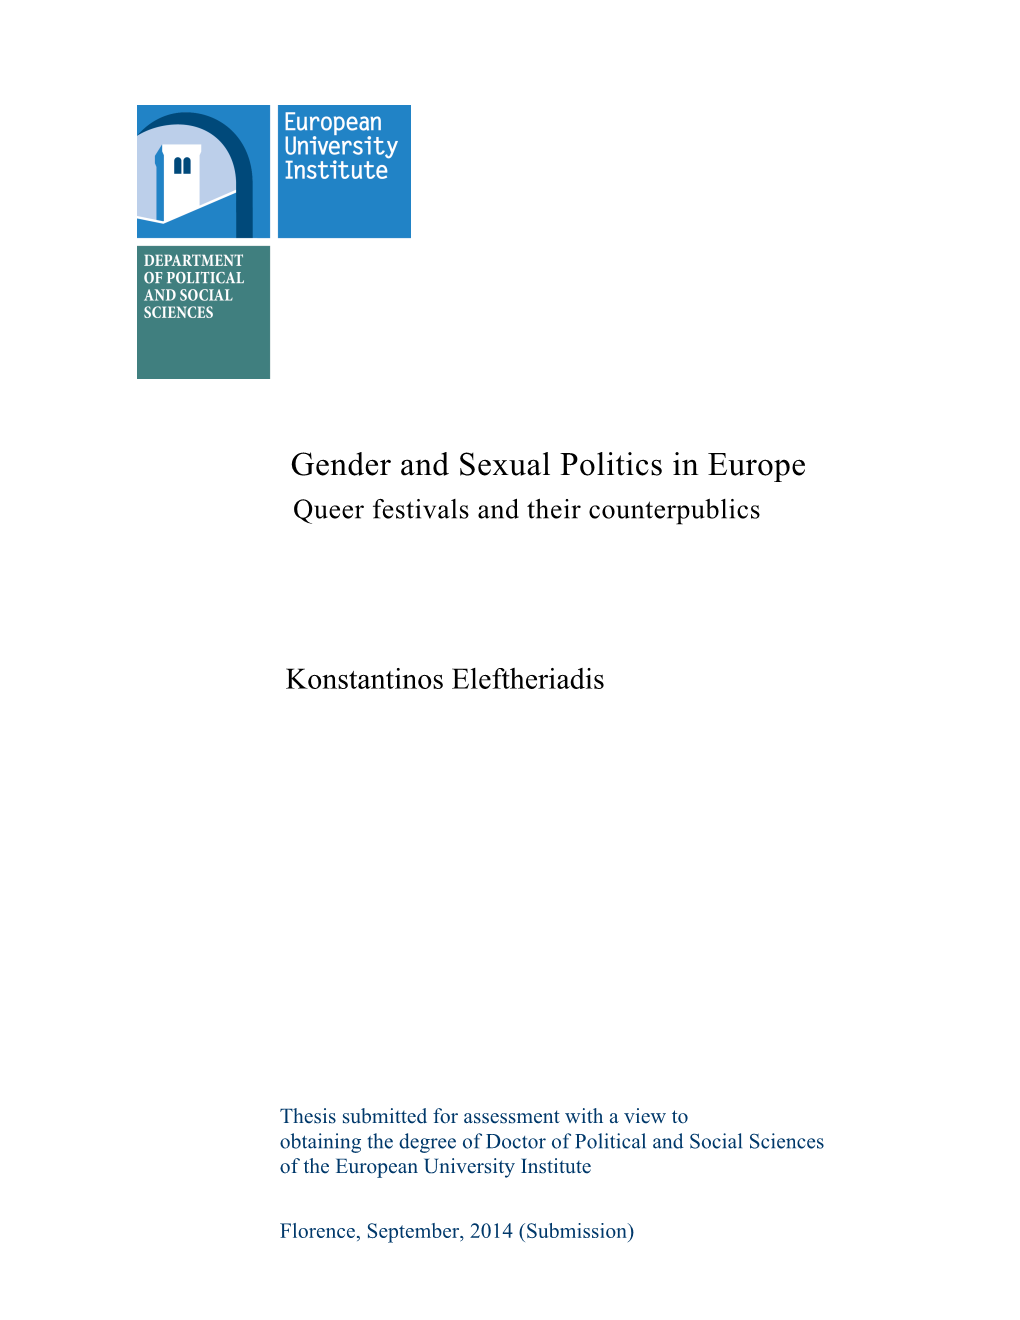 Gender and Sexual Politics in Europe Queer Festivals and Their Counterpublics